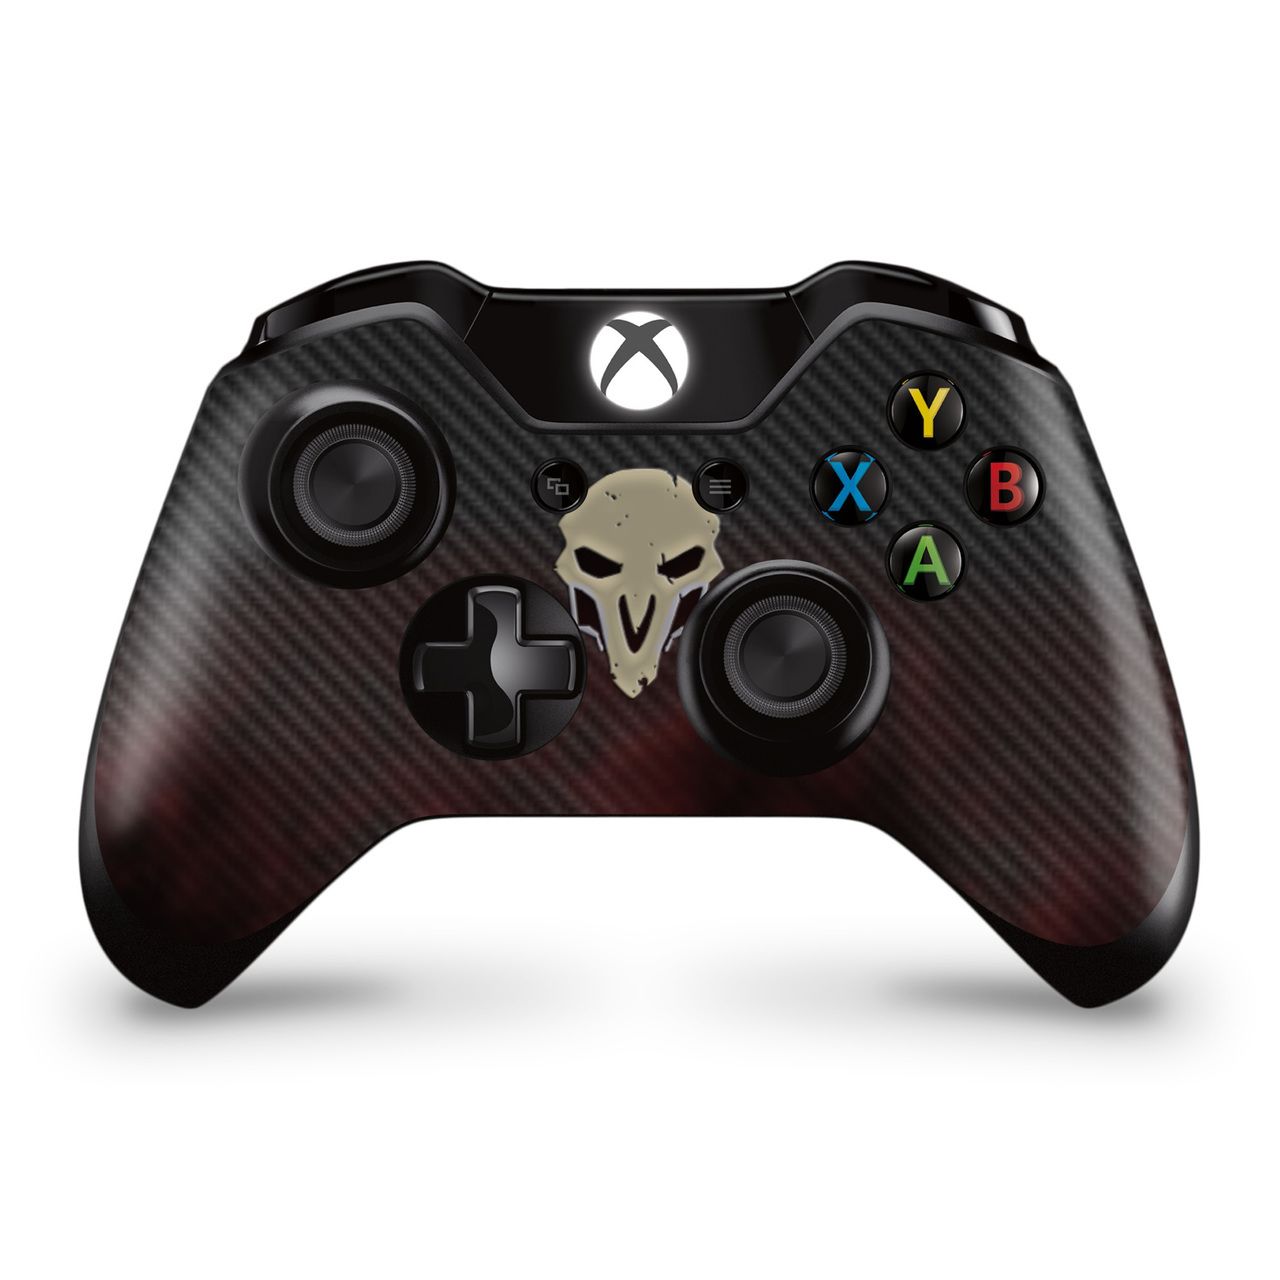 Reaper Xbox One Controller Skin. Xbox one, Xbox one controller, Xbox